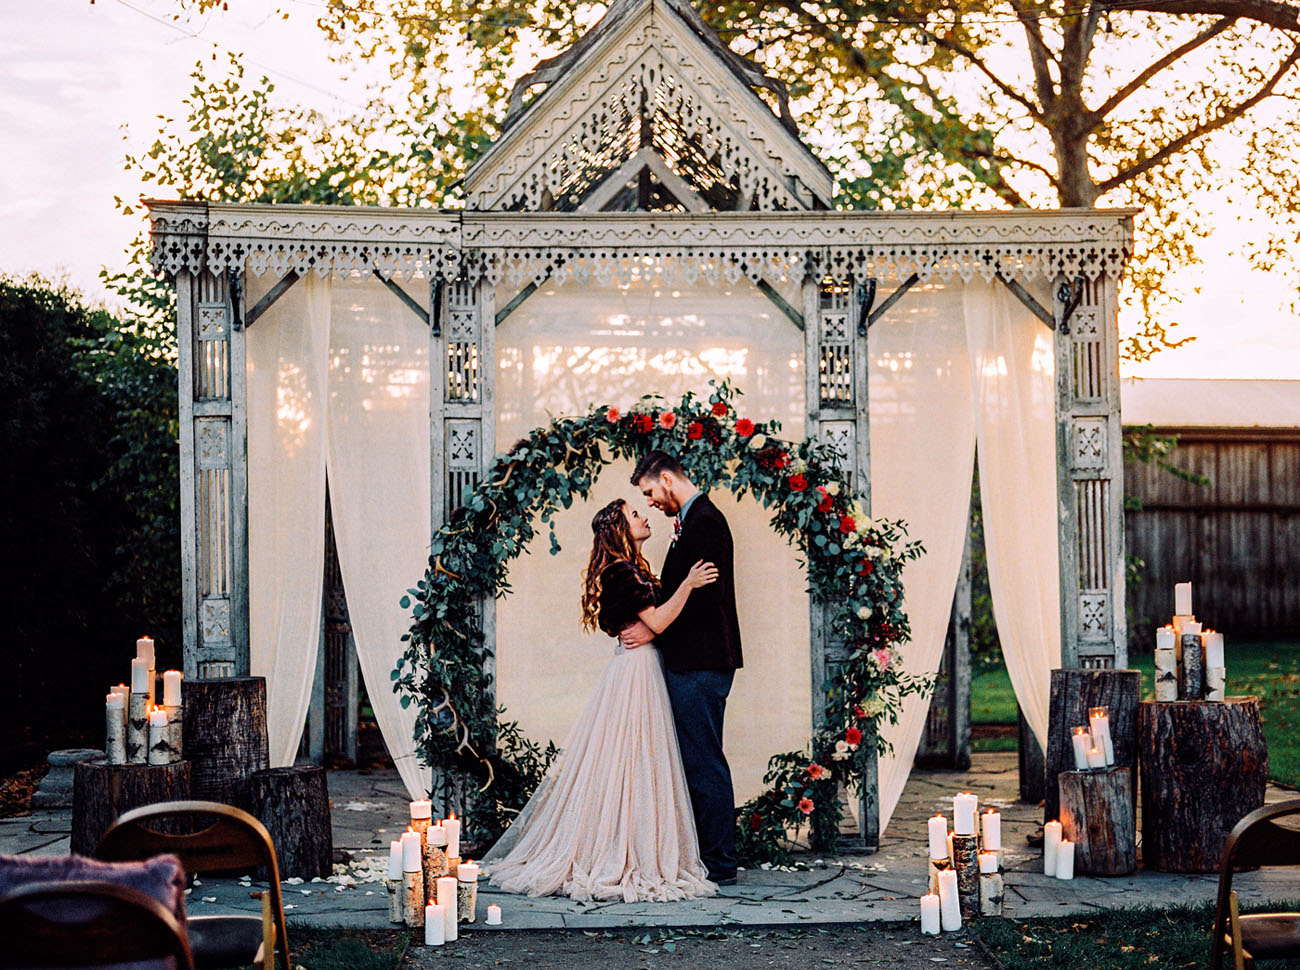 This stunning winter wedding shoot was done in rich hues and with rustic touches